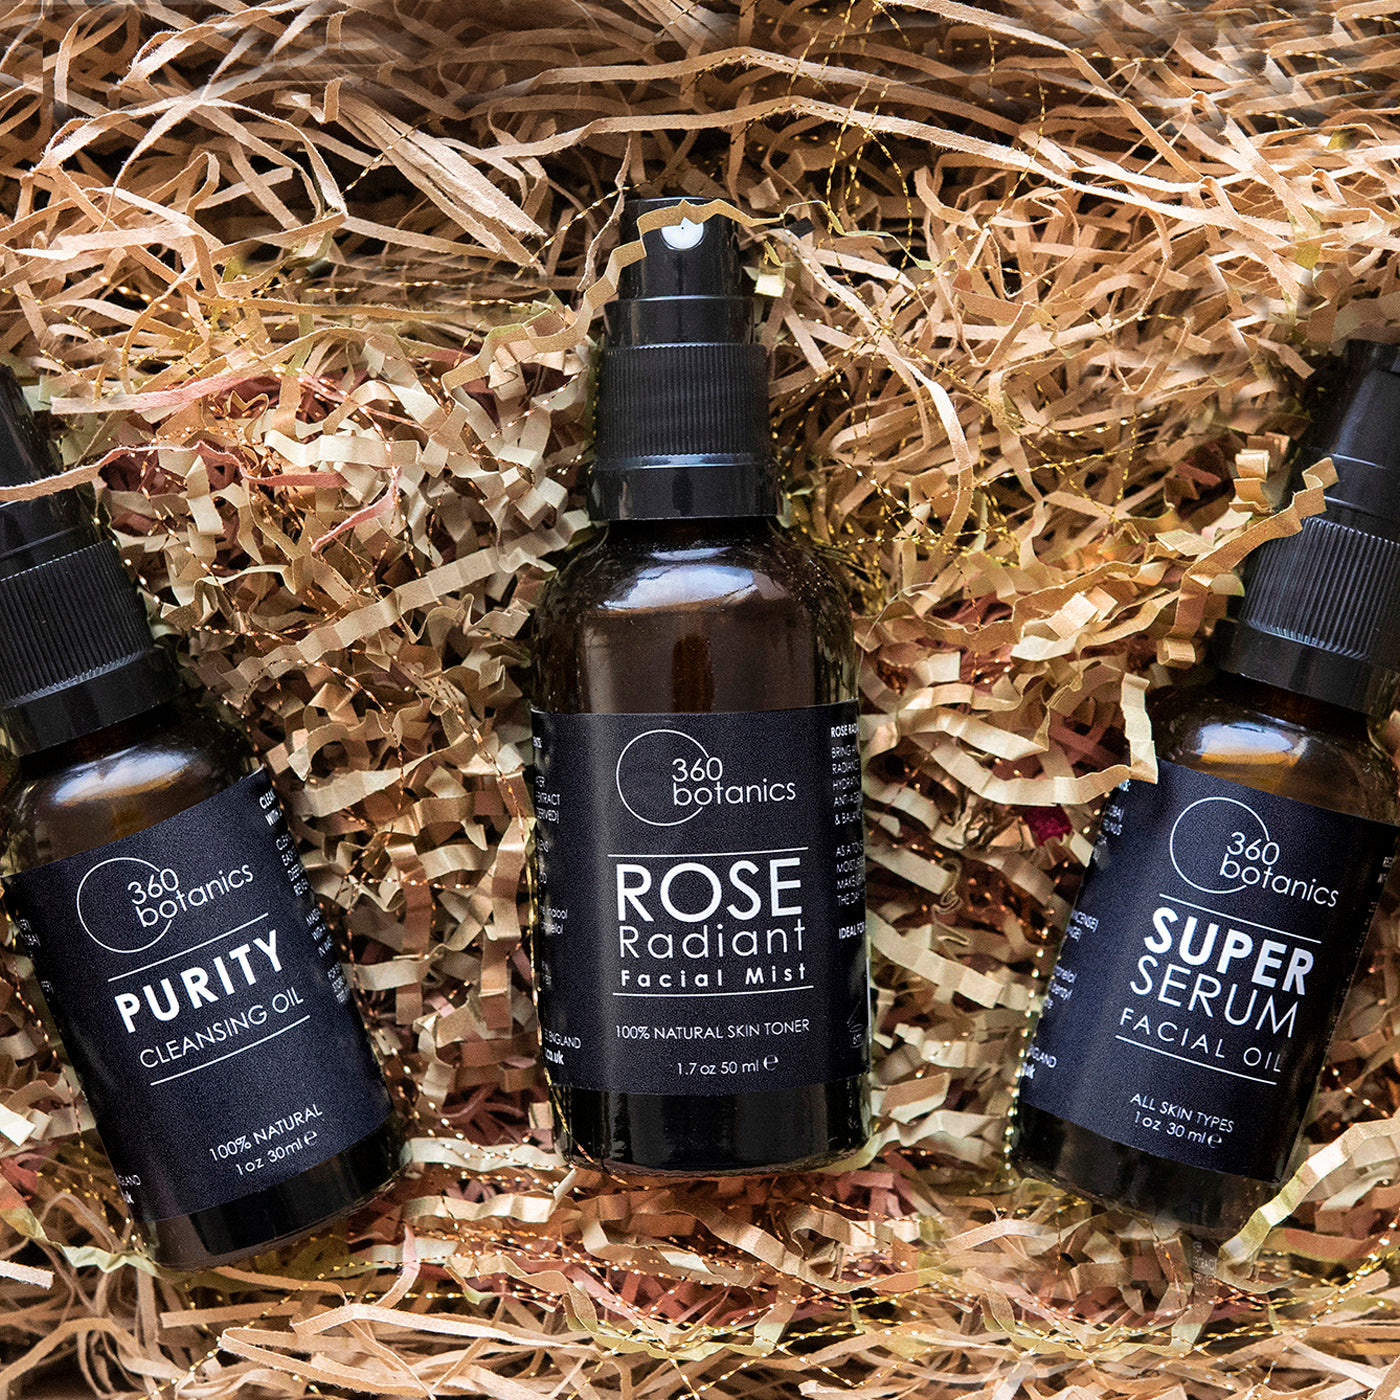 Three 360 Botanics skincare products nestled in shredded paper: Purity Cleansing Oil, Rose Radiant Facial Mist, and Super Serum Facial Oil, each labeled with their purpose and natural ingredients, in a 1 oz or 30 ml size.